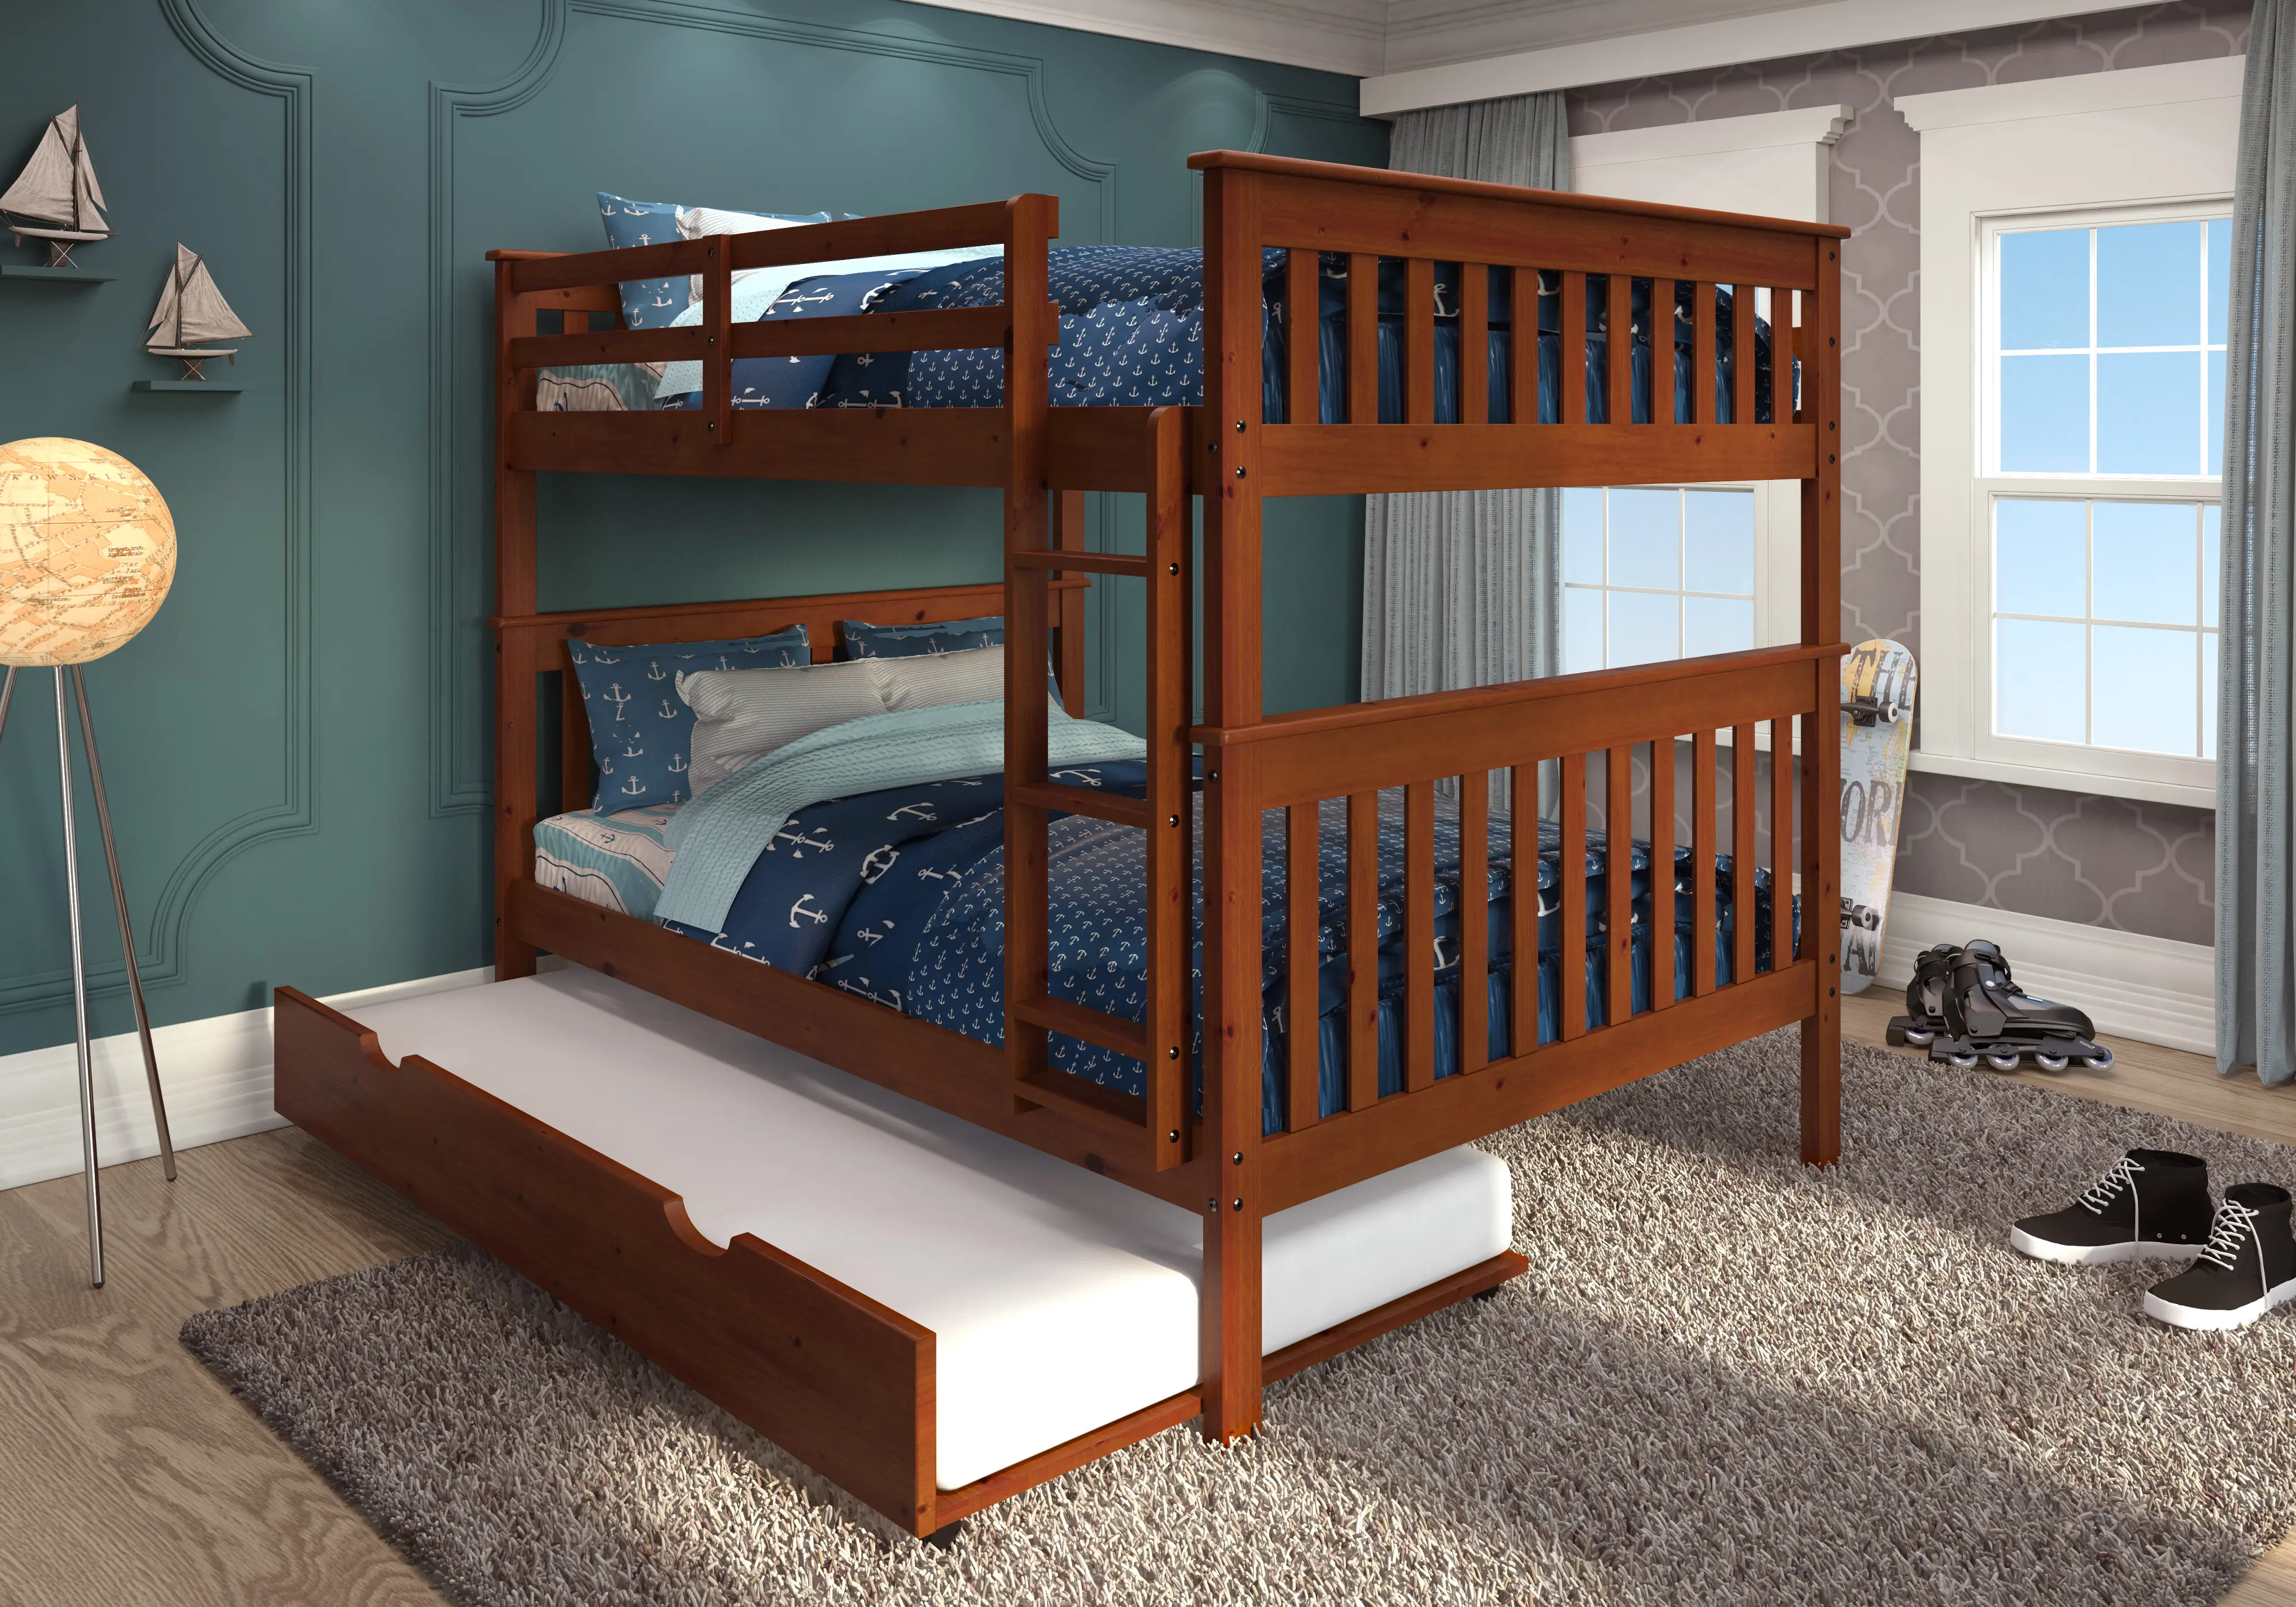 Craftsman Espresso Brown Full-over-Full Bunk Bed with Trundle